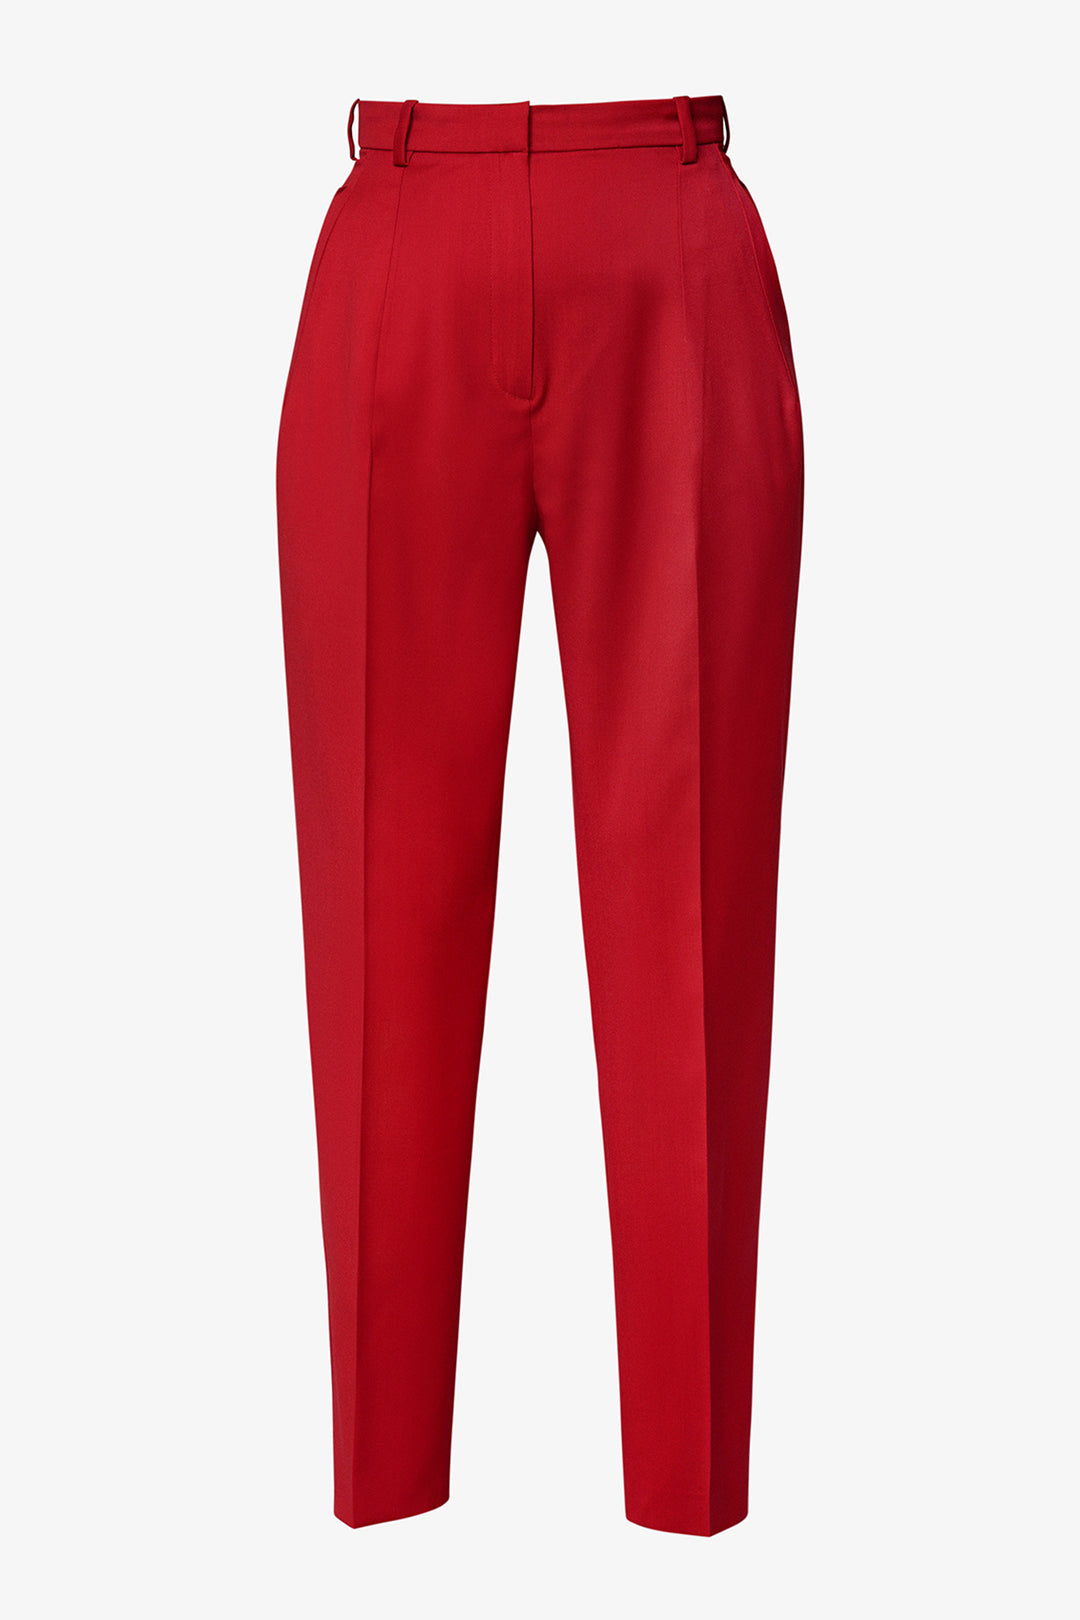 Hot Red Classic Conic Pants